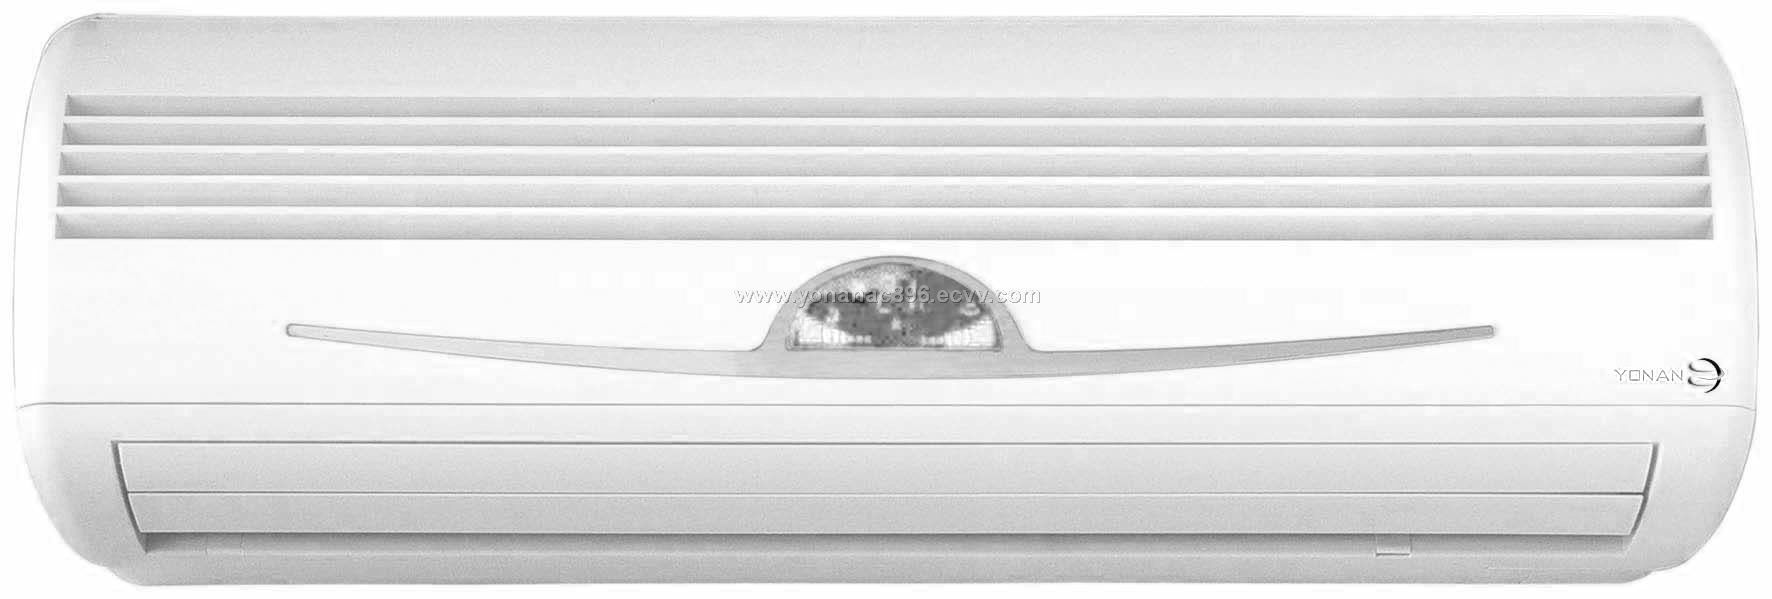 AMANA WALL UNIT AC AIR CONDITIONERS AT BIZRATE